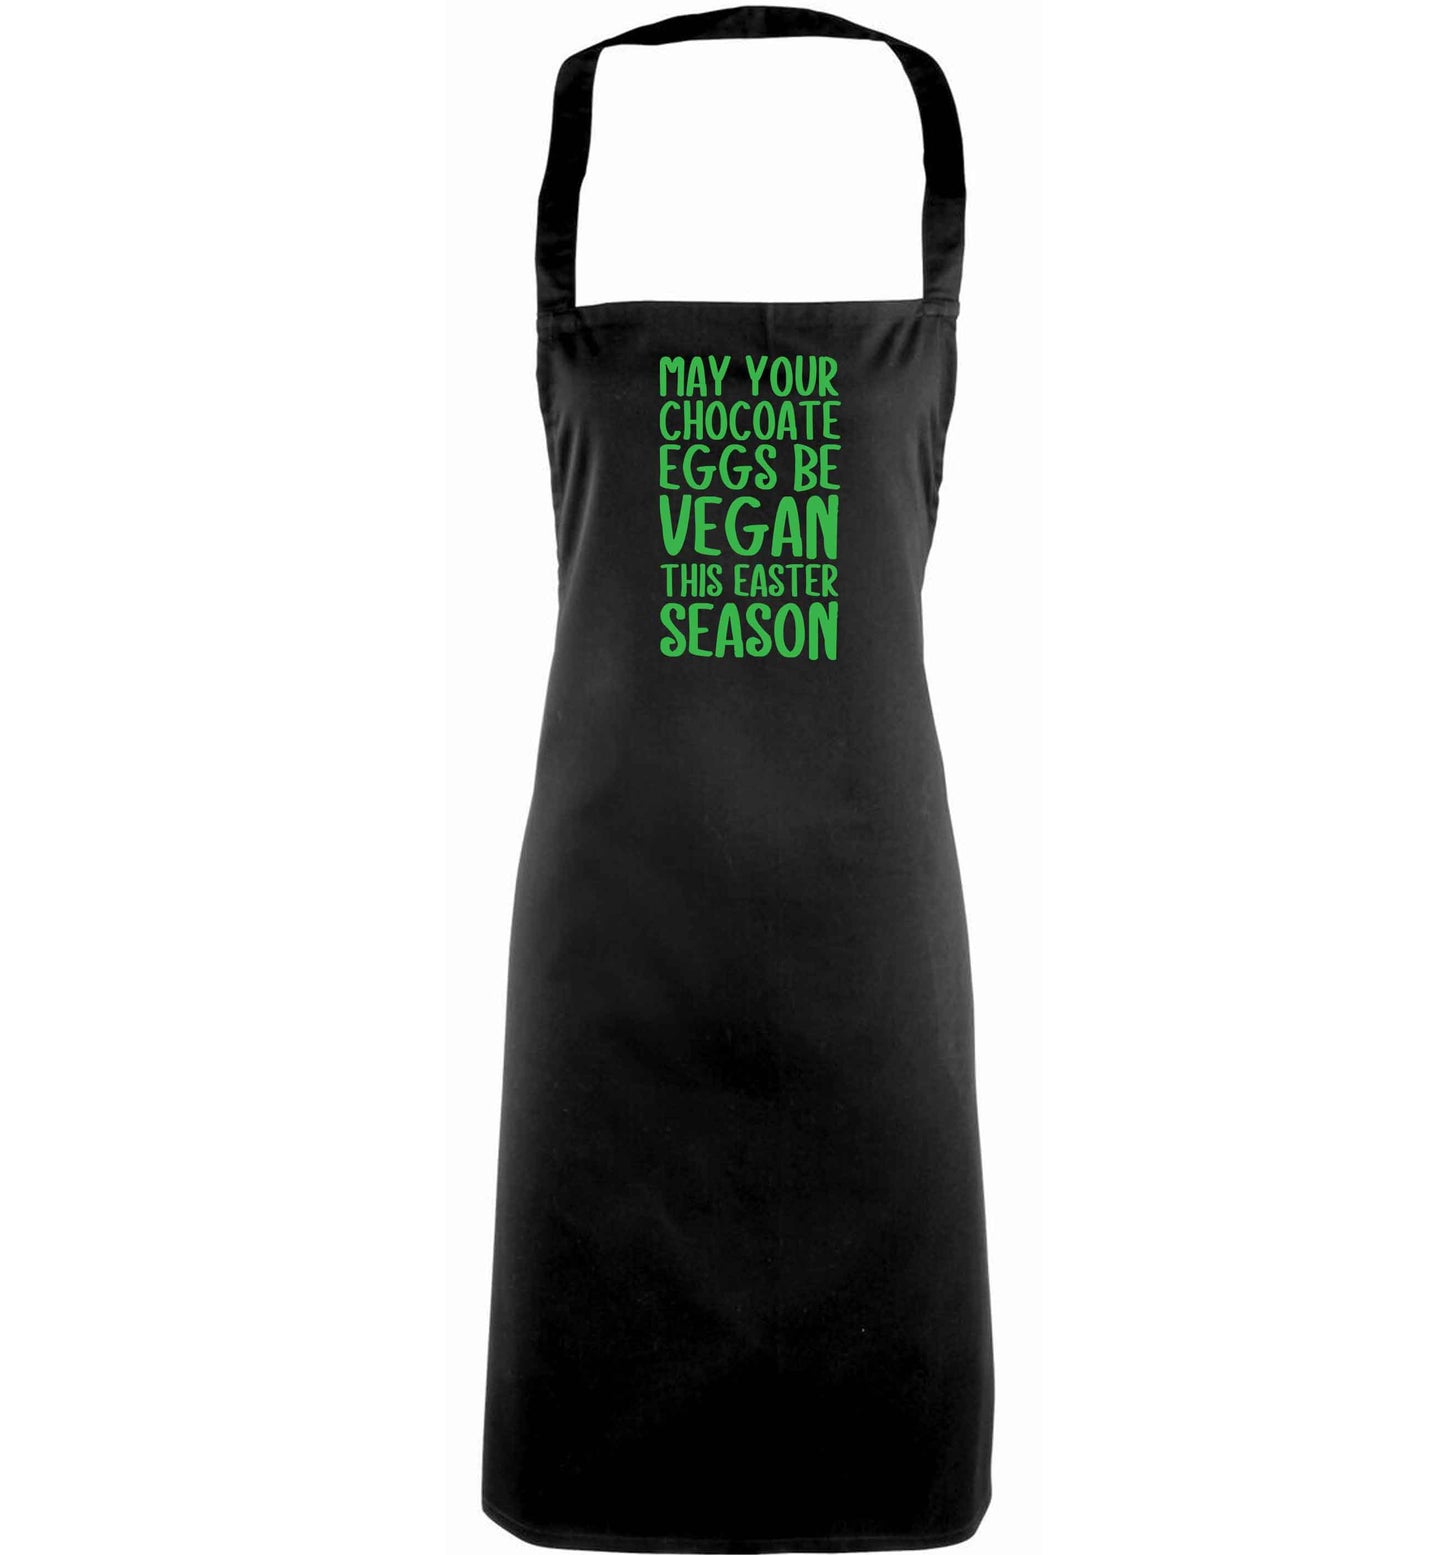 Easter bunny approved! Vegans will love this easter themed adults black apron